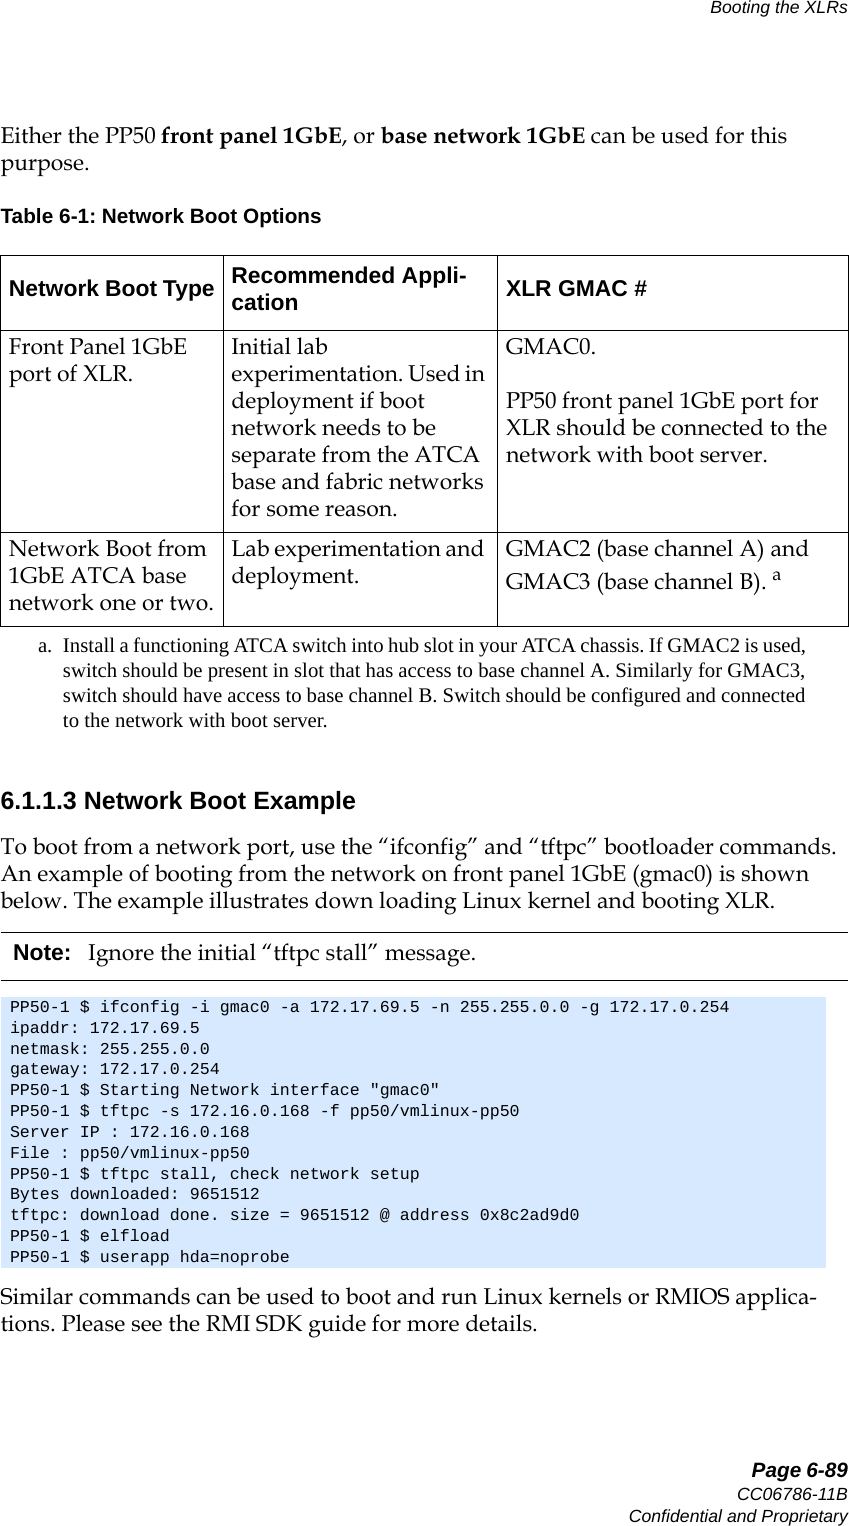   Page 6-89CC06786-11BConfidential and ProprietaryBooting the XLRs14ABABPreliminaryEither the PP50 front panel 1GbE, or base network 1GbE can be used for this purpose. 6.1.1.3 Network Boot ExampleTo boot from a network port, use the “ifconfig” and “tftpc” bootloader commands. An example of booting from the network on front panel 1GbE (gmac0) is shown below. The example illustrates down loading Linux kernel and booting XLR. Similar commands can be used to boot and run Linux kernels or RMIOS applica-tions. Please see the RMI SDK guide for more details.Table 6-1: Network Boot OptionsNetwork Boot Type Recommended Appli-cation XLR GMAC #Front Panel 1GbE port of XLR.Initial lab experimentation. Used in deployment if boot network needs to be separate from the ATCA base and fabric networks for some reason.GMAC0.PP50 front panel 1GbE port for XLR should be connected to the network with boot server.Network Boot from 1GbE ATCA base network one or two.Lab experimentation and deployment.GMAC2 (base channel A) and GMAC3 (base channel B). aa. Install a functioning ATCA switch into hub slot in your ATCA chassis. If GMAC2 is used, switch should be present in slot that has access to base channel A. Similarly for GMAC3, switch should have access to base channel B. Switch should be configured and connected to the network with boot server.Note: Ignore the initial “tftpc stall” message.PP50-1 $ ifconfig -i gmac0 -a 172.17.69.5 -n 255.255.0.0 -g 172.17.0.254ipaddr: 172.17.69.5netmask: 255.255.0.0gateway: 172.17.0.254PP50-1 $ Starting Network interface &quot;gmac0&quot;PP50-1 $ tftpc -s 172.16.0.168 -f pp50/vmlinux-pp50Server IP : 172.16.0.168File : pp50/vmlinux-pp50PP50-1 $ tftpc stall, check network setupBytes downloaded: 9651512tftpc: download done. size = 9651512 @ address 0x8c2ad9d0PP50-1 $ elfloadPP50-1 $ userapp hda=noprobe